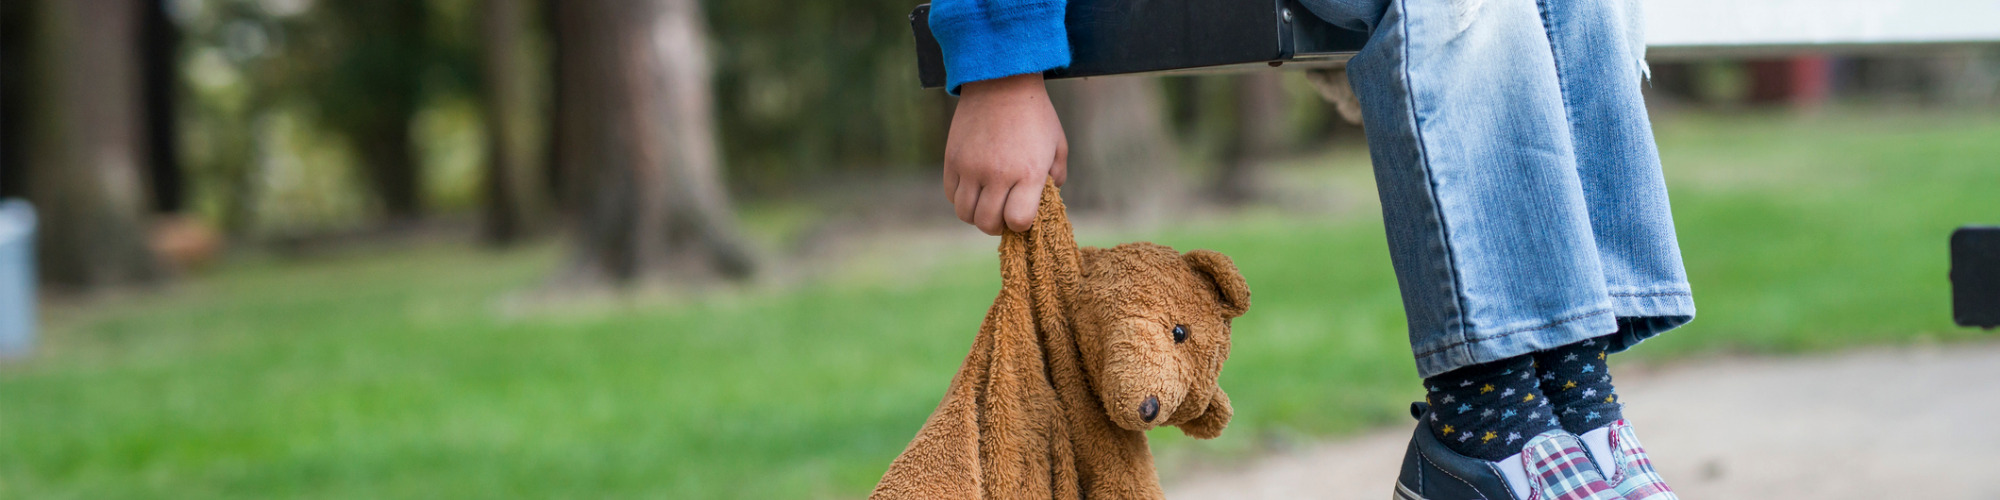 Practice & Procedure in International Child Abduction Cases in England & Wales